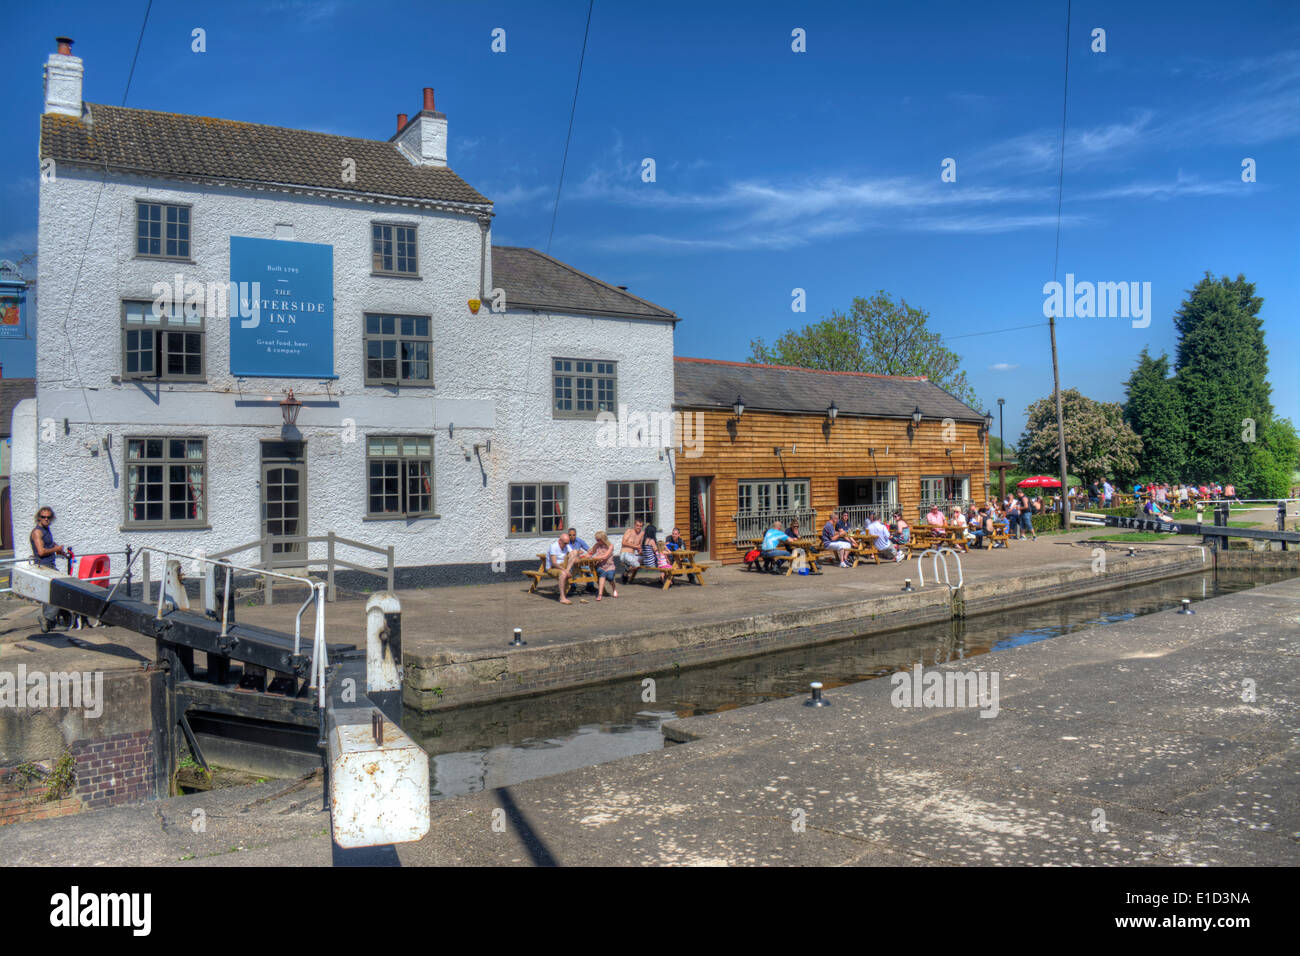 HDR image of The Waterside Inn and Mountsorrel Lock on the River Soar, Leicestershire England Stock Photo